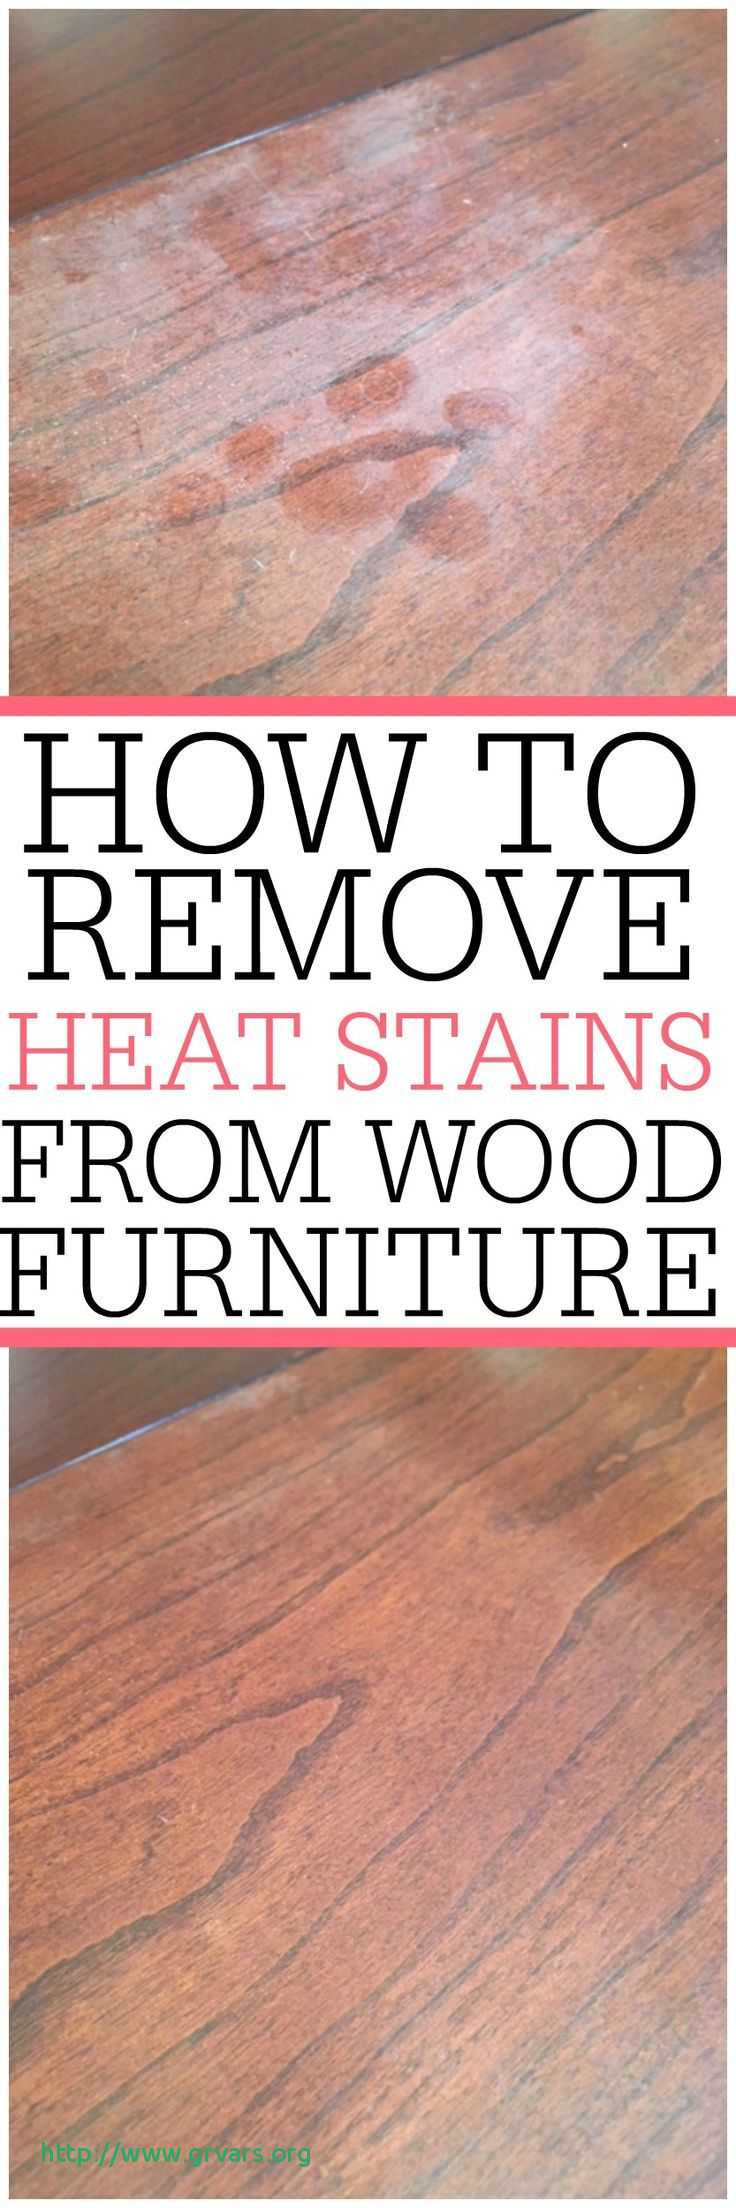 14 Fashionable How to Make Hardwood Floor Cleaner 2024 free download how to make hardwood floor cleaner of 24 inspirant homemade hardwood floor cleaner without vinegar ideas pertaining to heat stains on wood furniture check out an easy way on how to remove he